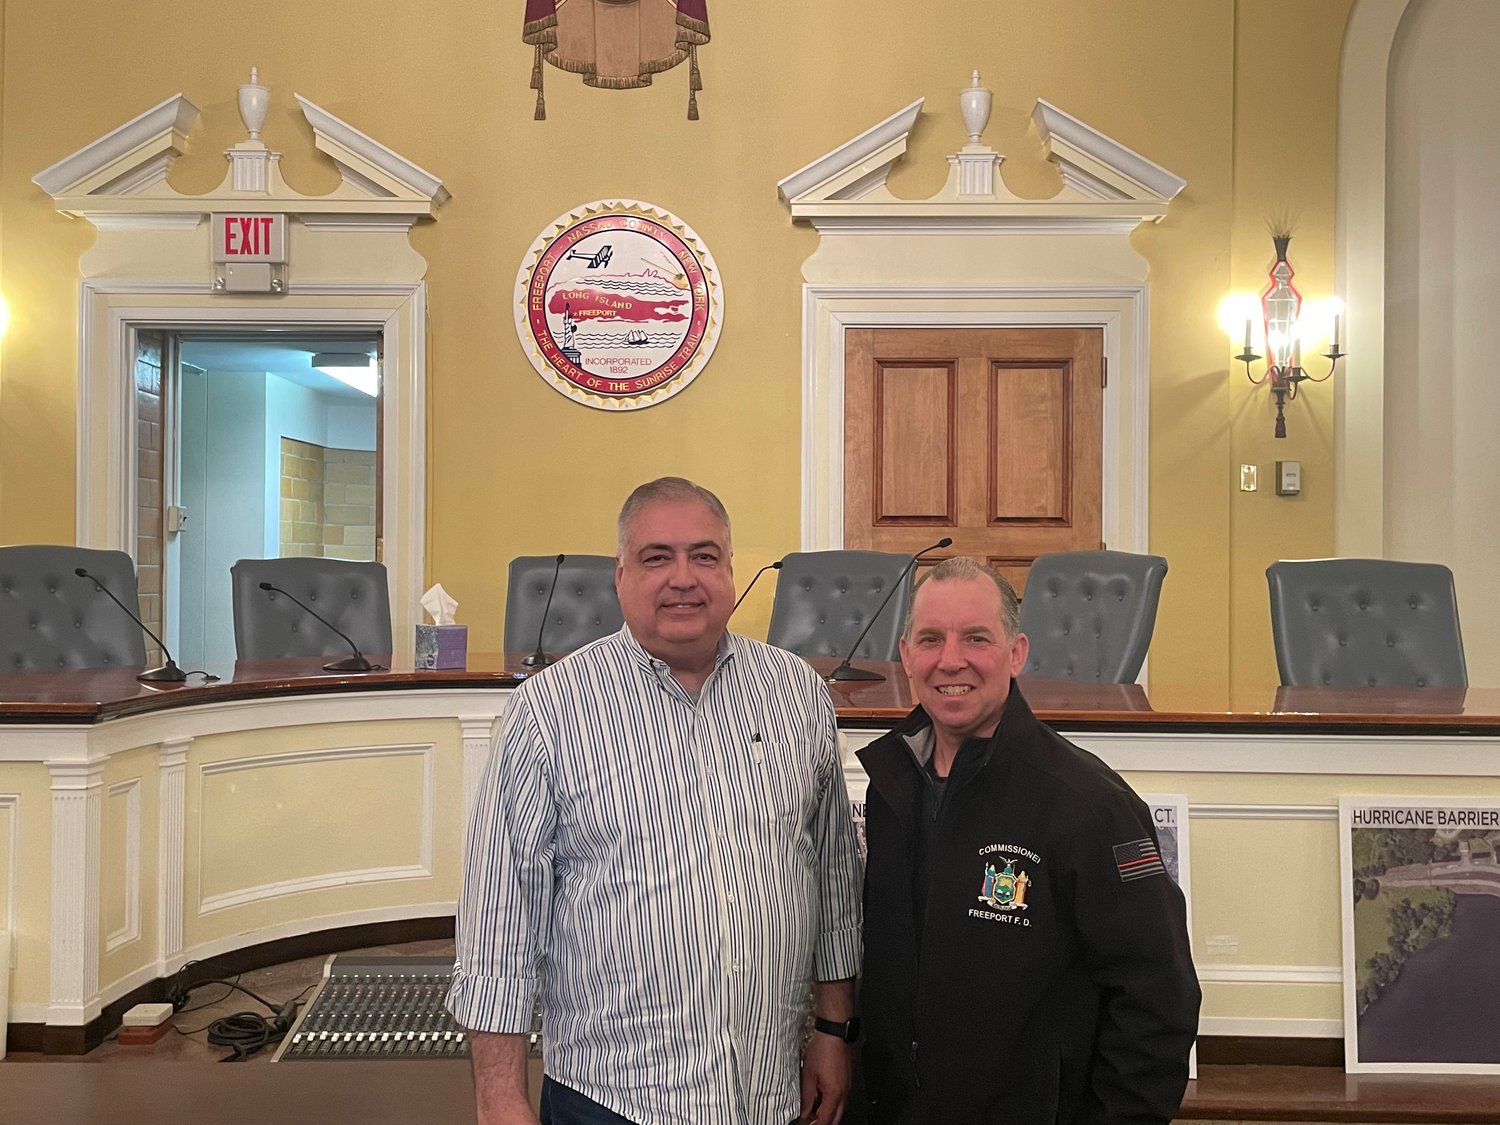 Newly reelected Village Trustees Jorge A. Martinez and Christopher L. Squeri pose for a photo after being sworn in for their four-year term in office, with a pledge to work towards the betterment of the village and its residents.